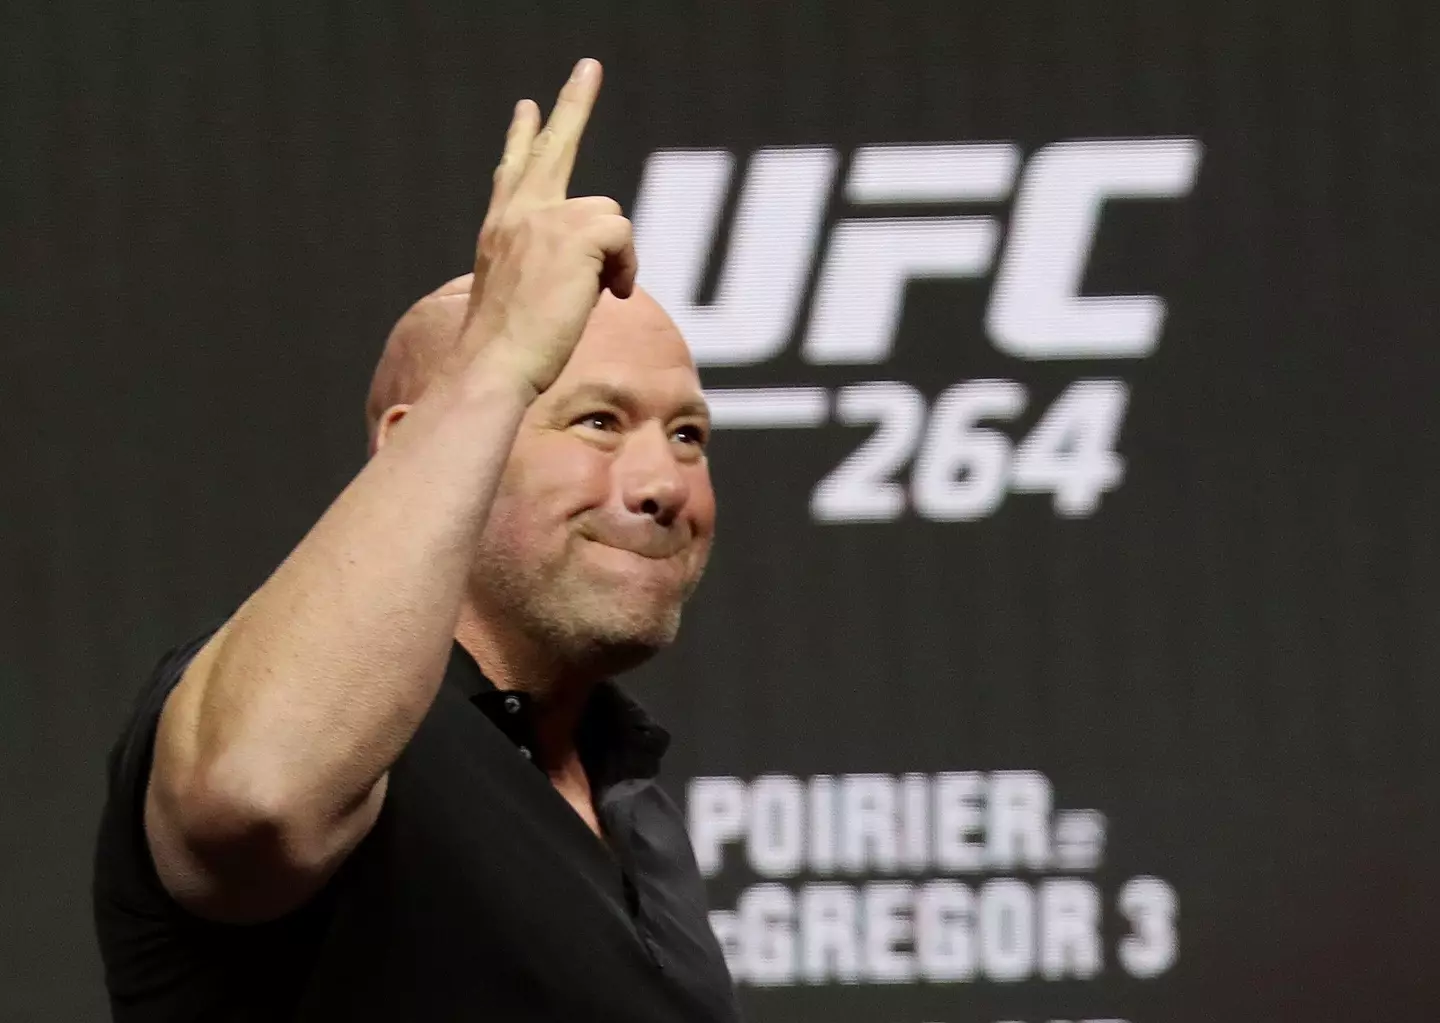 Dana White says illegal streamers have been 'f**king smashed'.